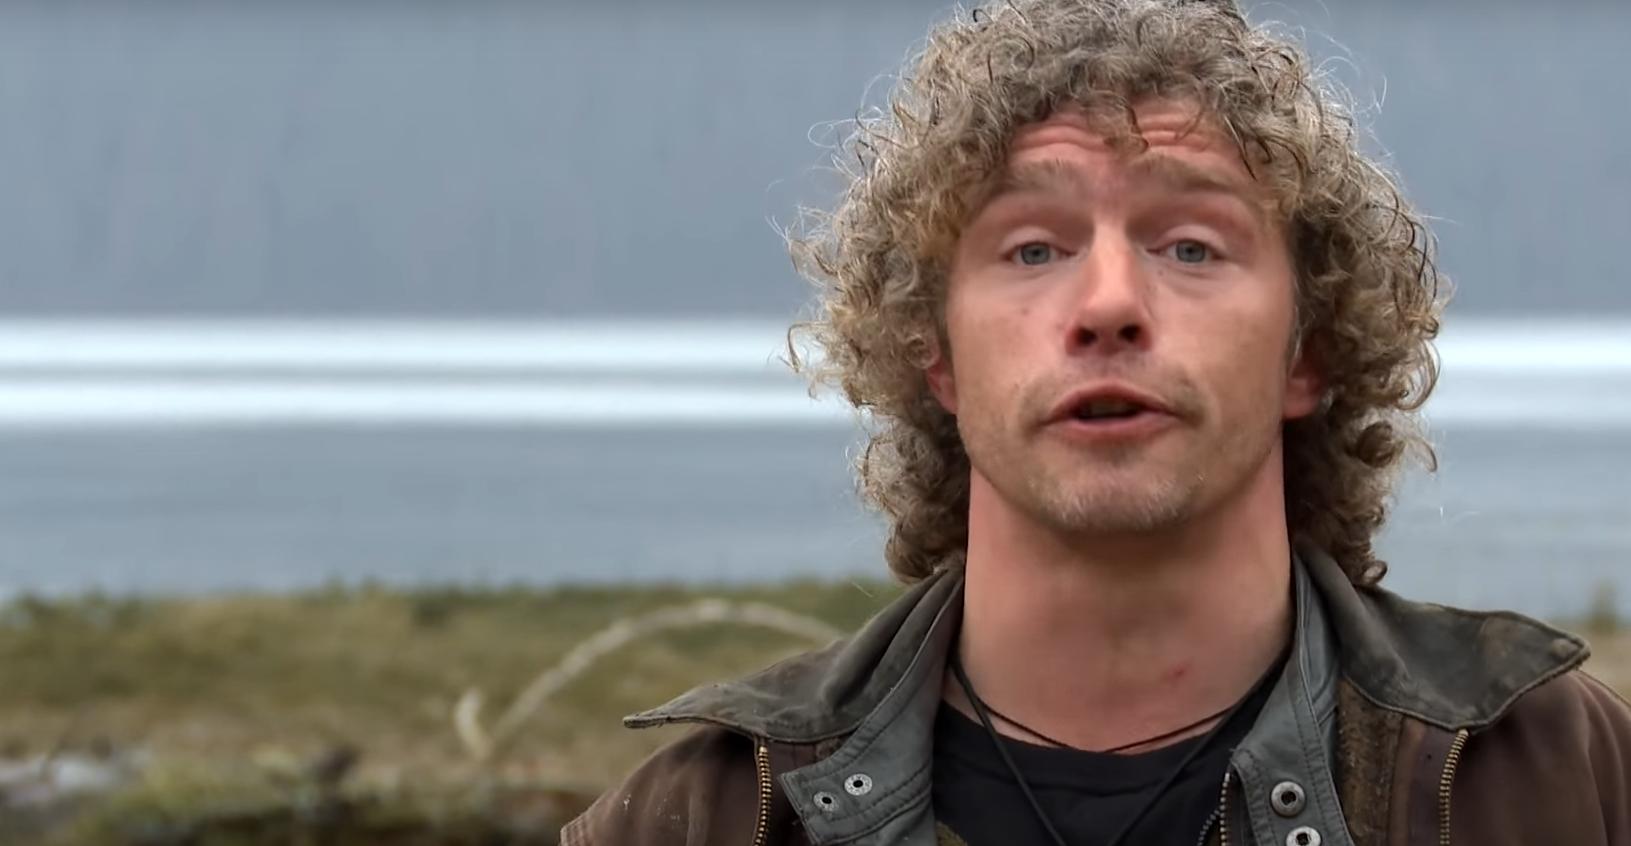 Is Matt Brown married and where is the Alaskan Bush People star today?